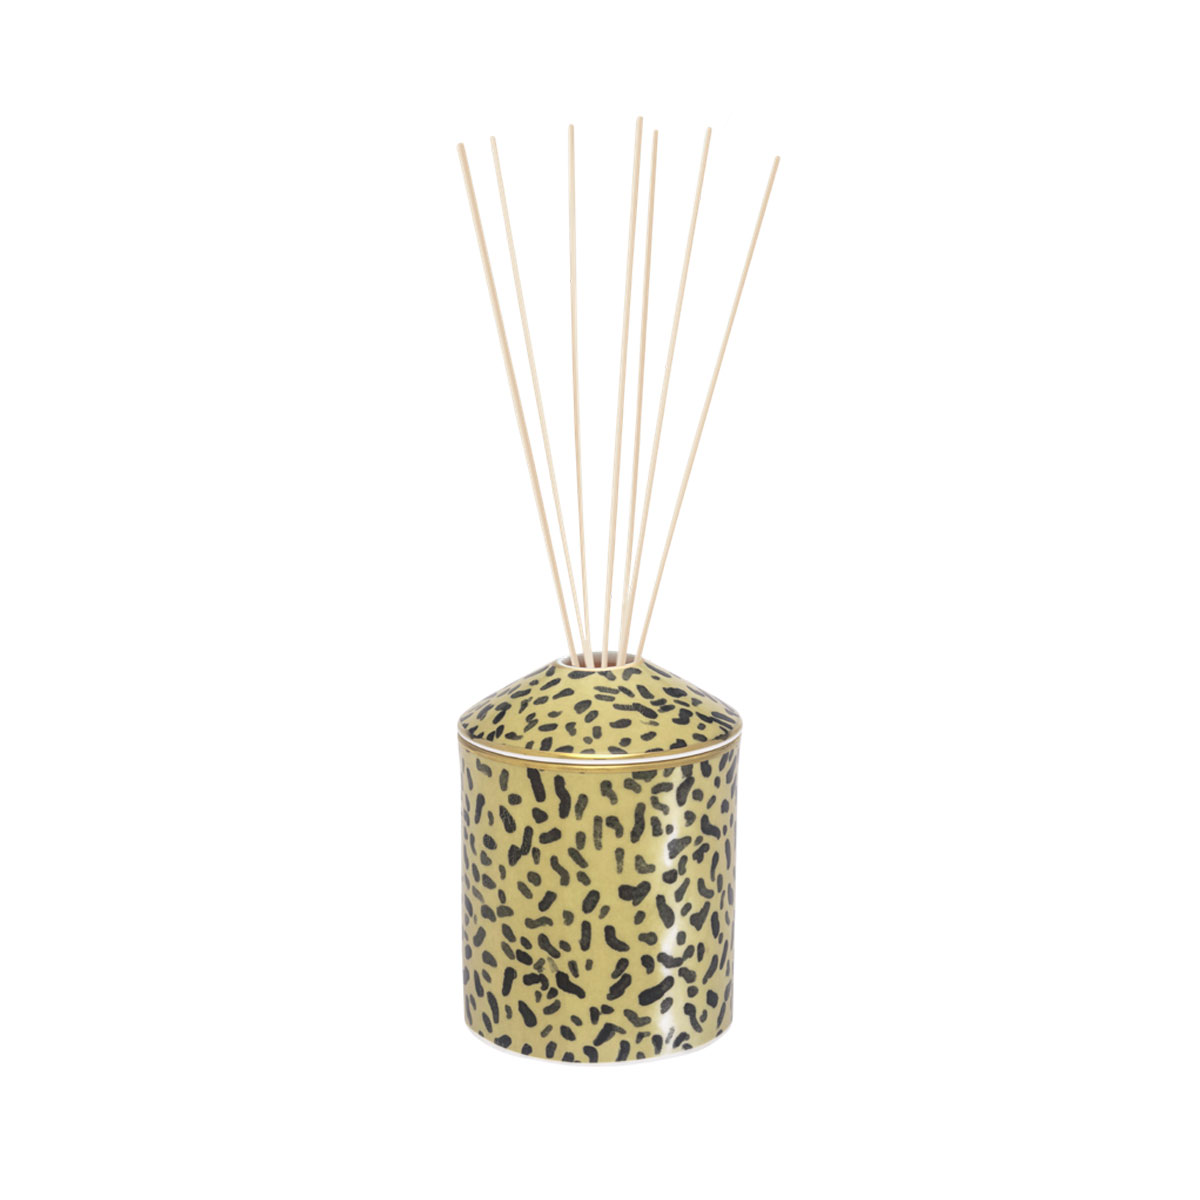 Halcyon Days Leopard Sandalwood and Vetiver Diffuser